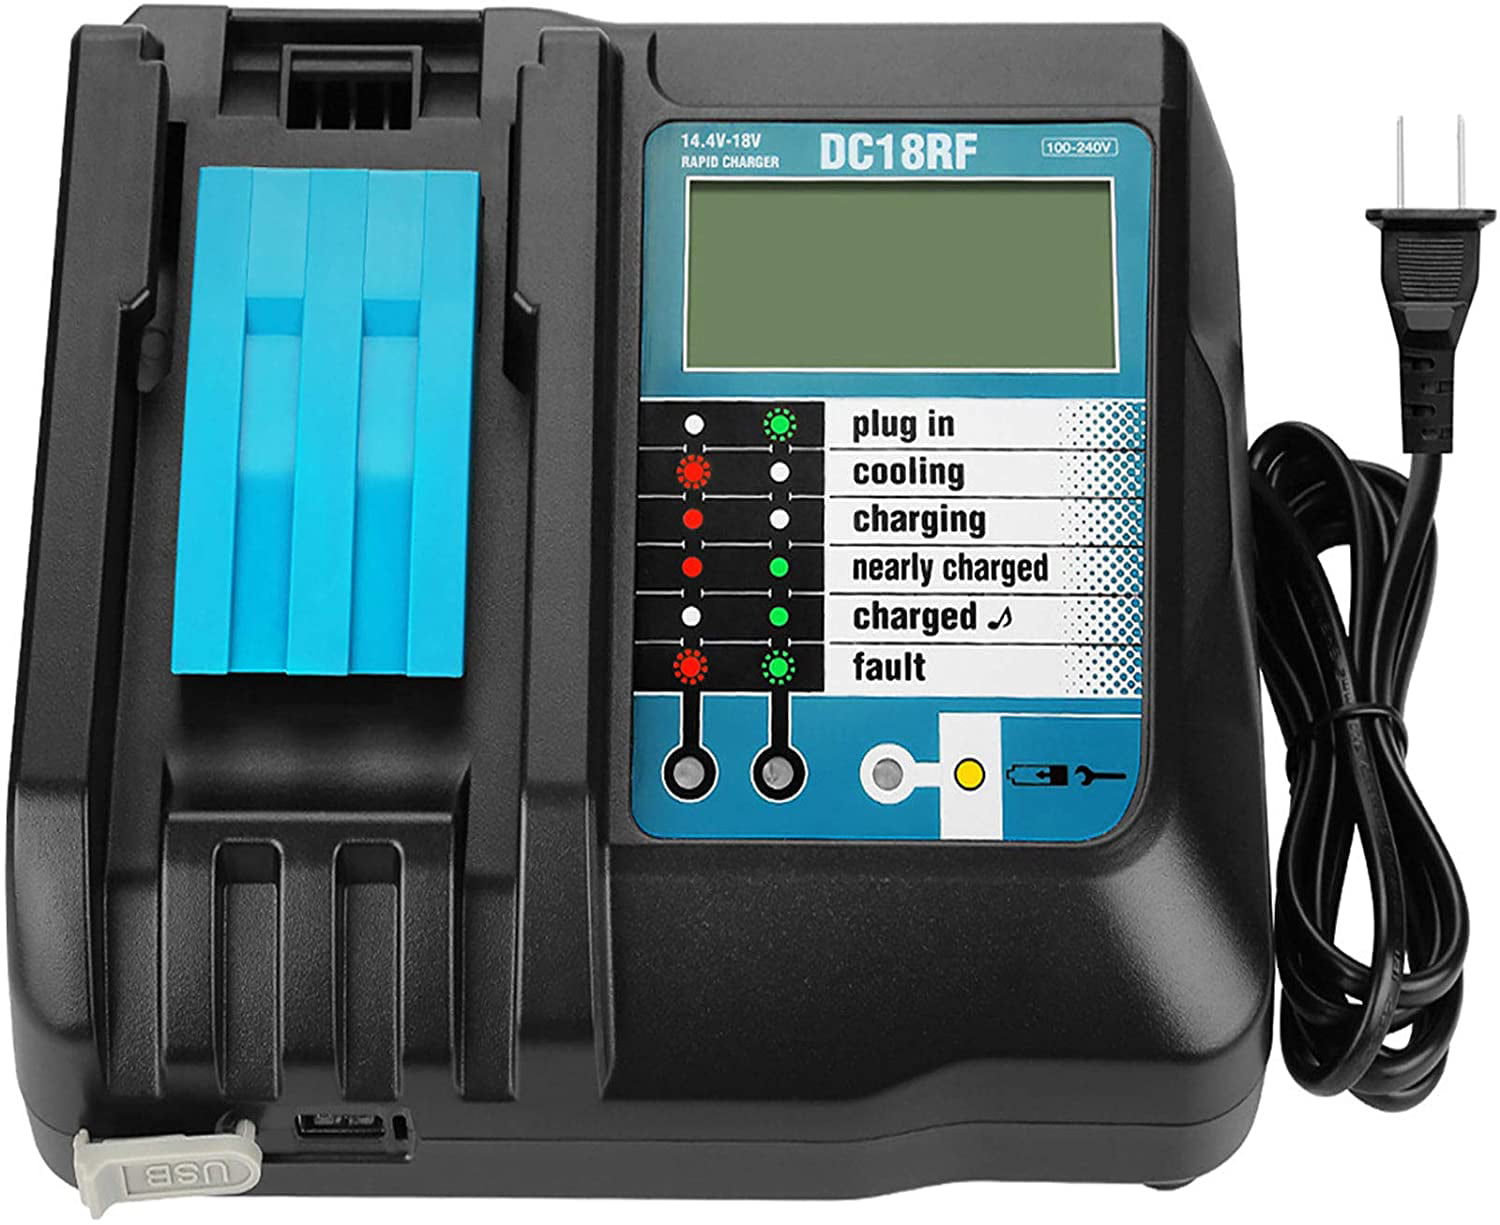 Makita 18V LXT Lithium-Ion Rapid Tool Battery Charger DC18RC 